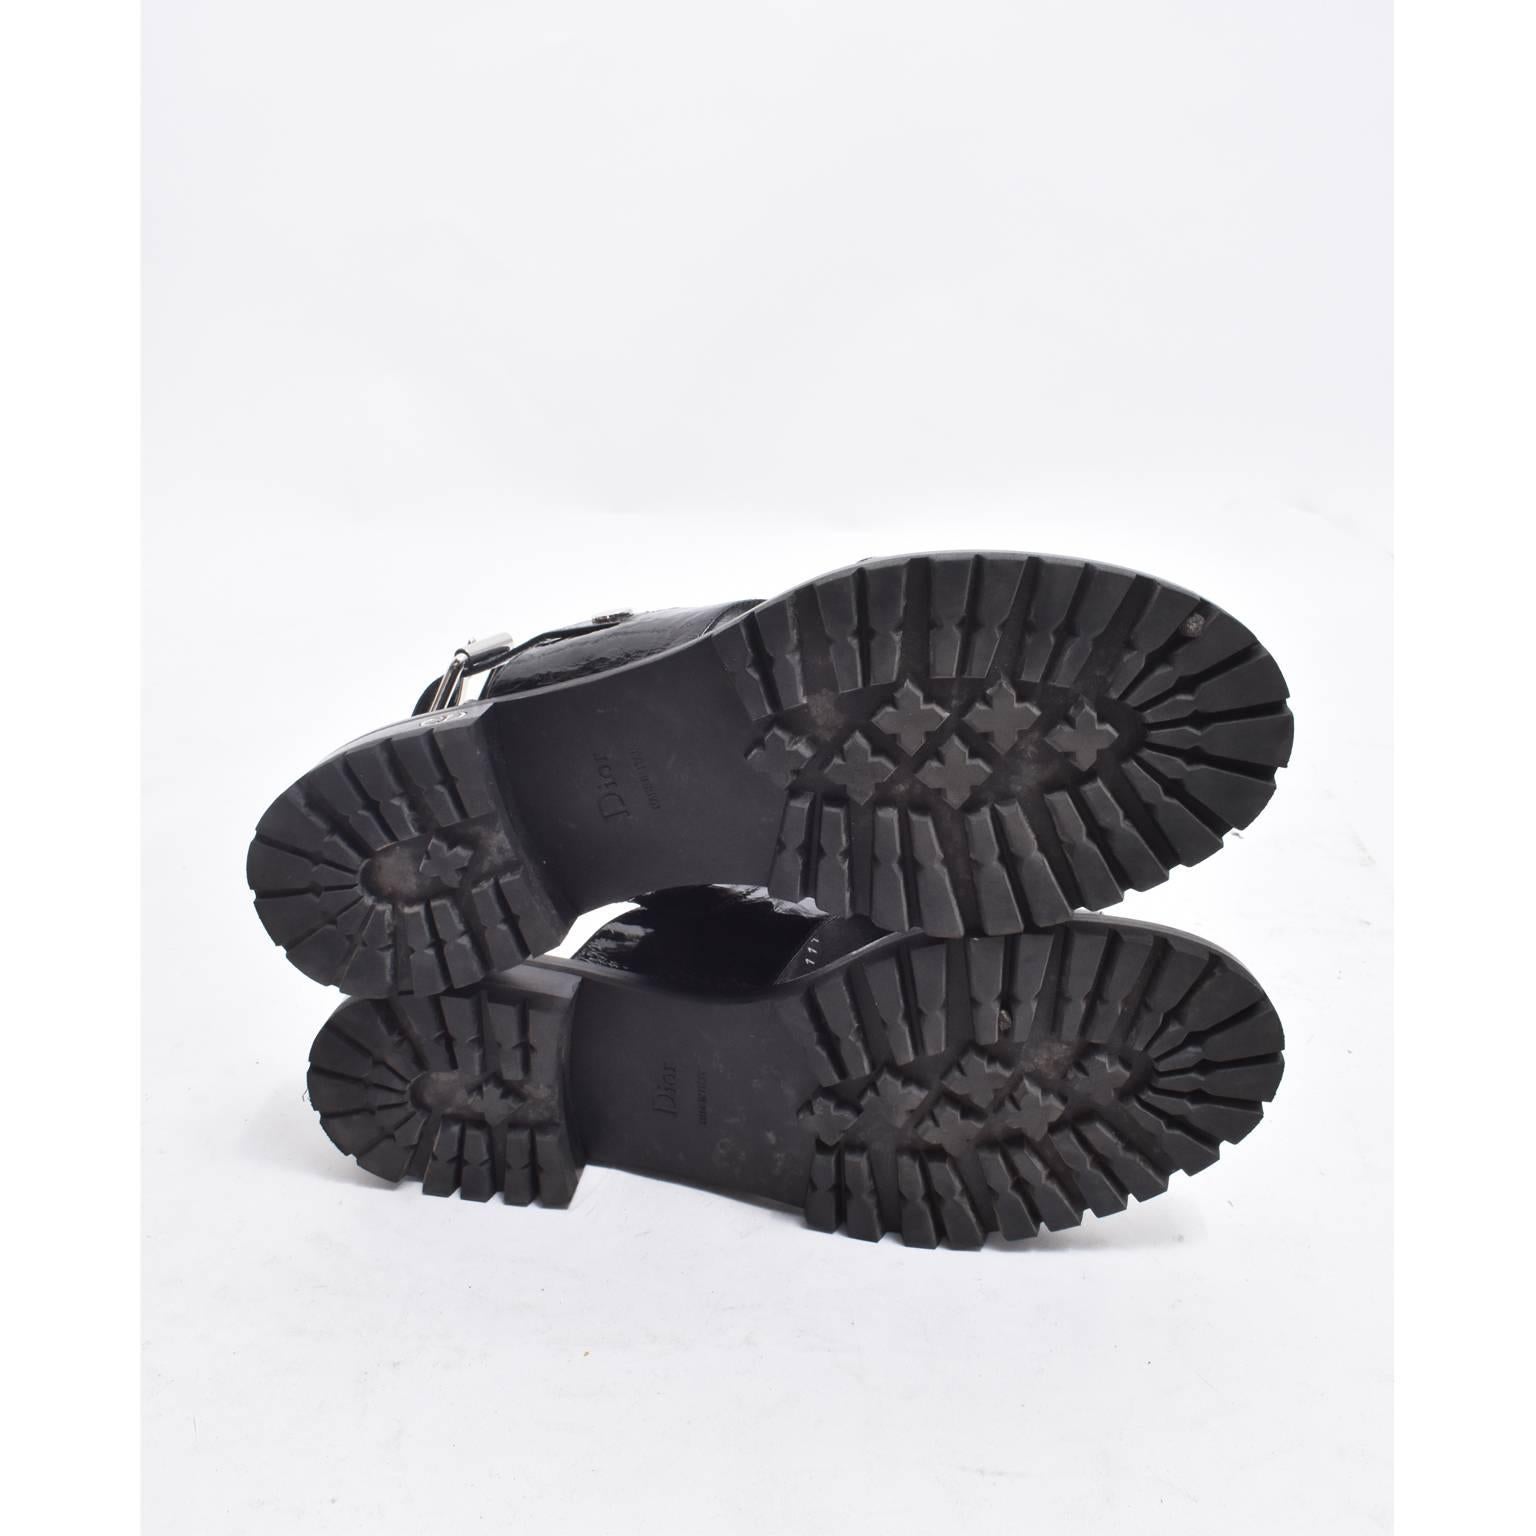 Christian Dior Black Leather Sandals with Crystal Detail Embellishments 1